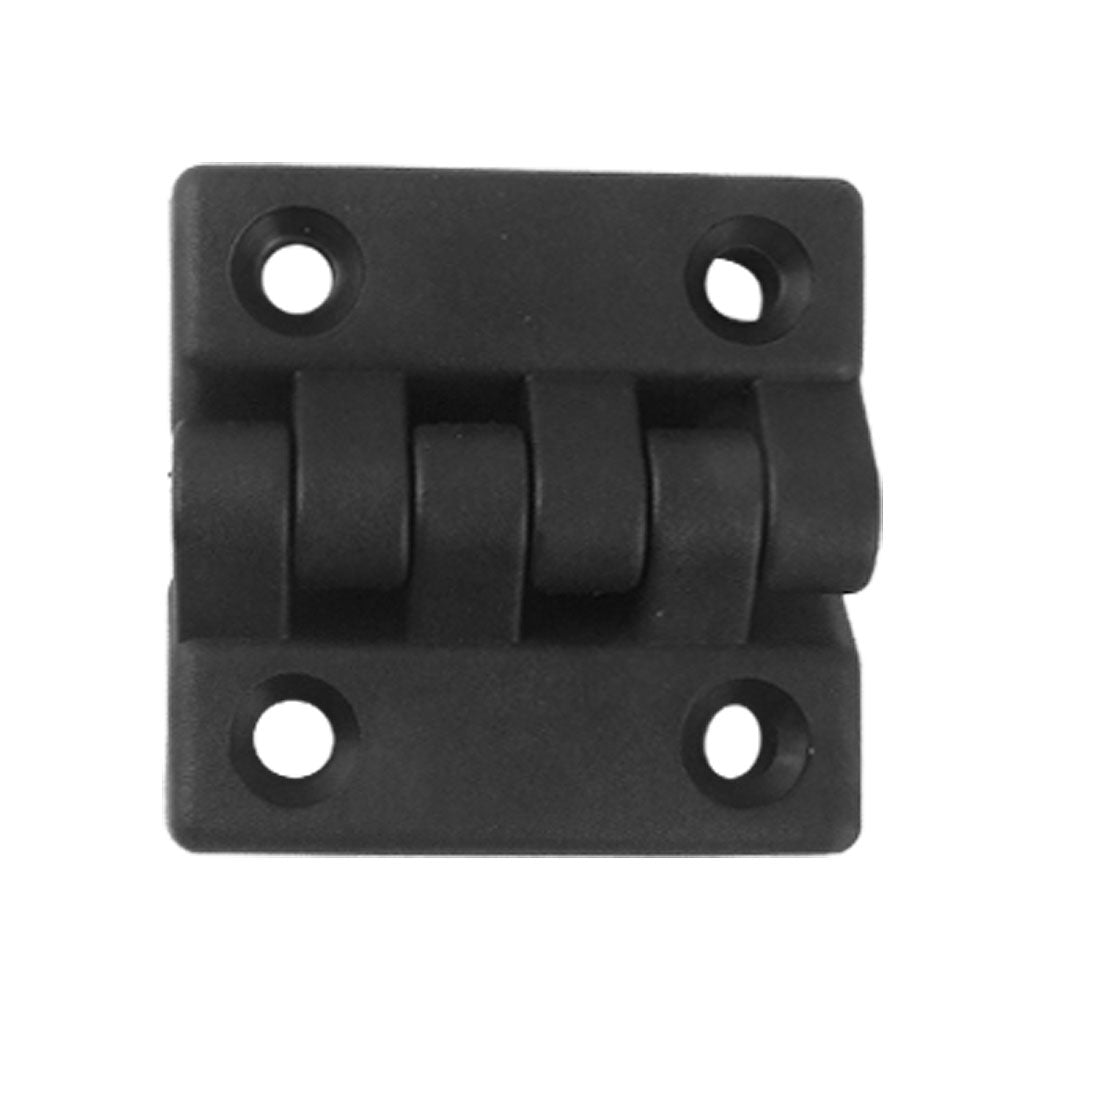 uxcell Uxcell Reinforced Black Plastic Countersunk Hole Hinge